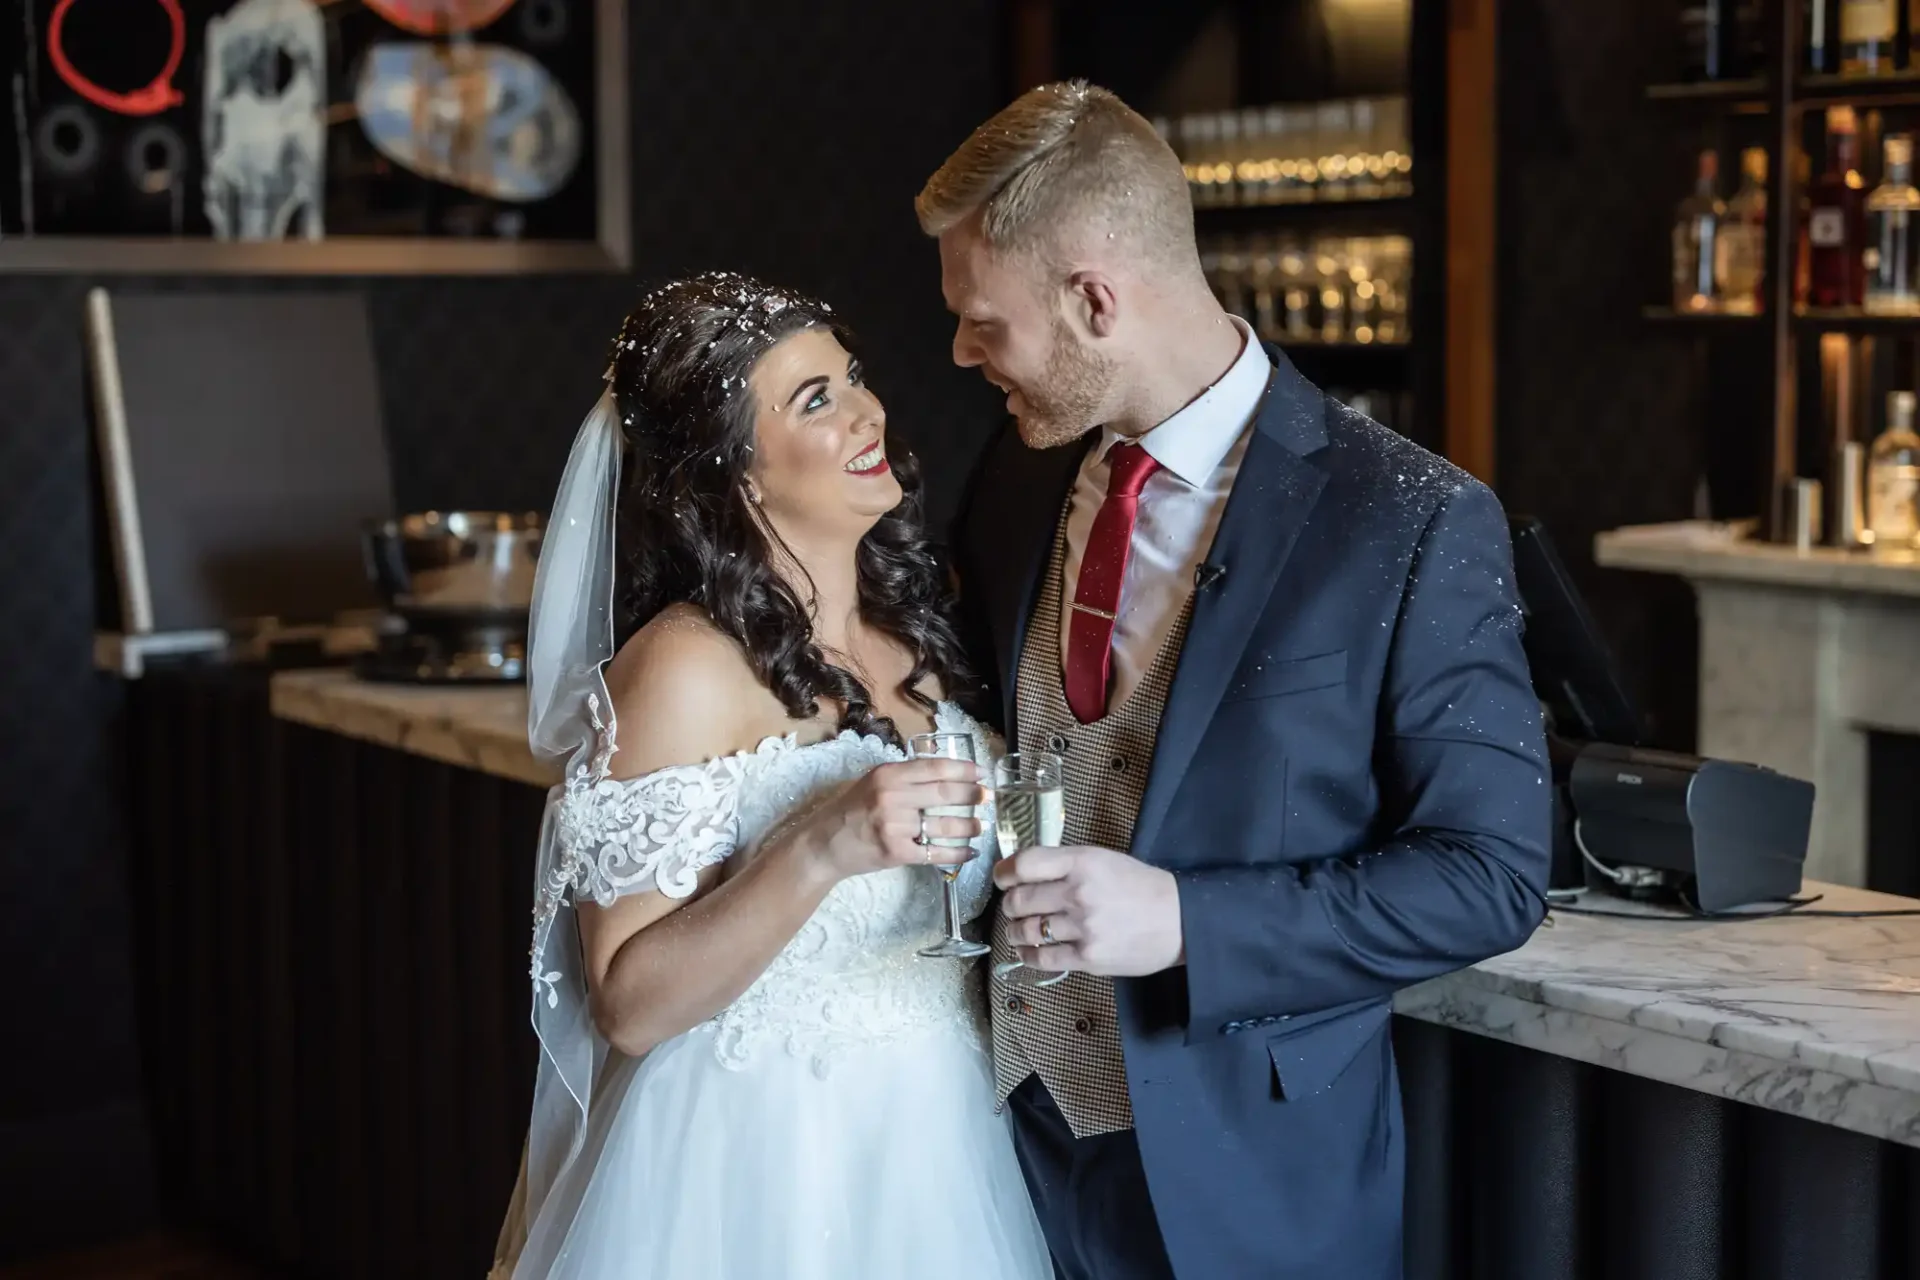 Bride and groom smiling at each other, holding champagne glasses at a bar, groom in a grey suit and bride in a white gown with tiara.